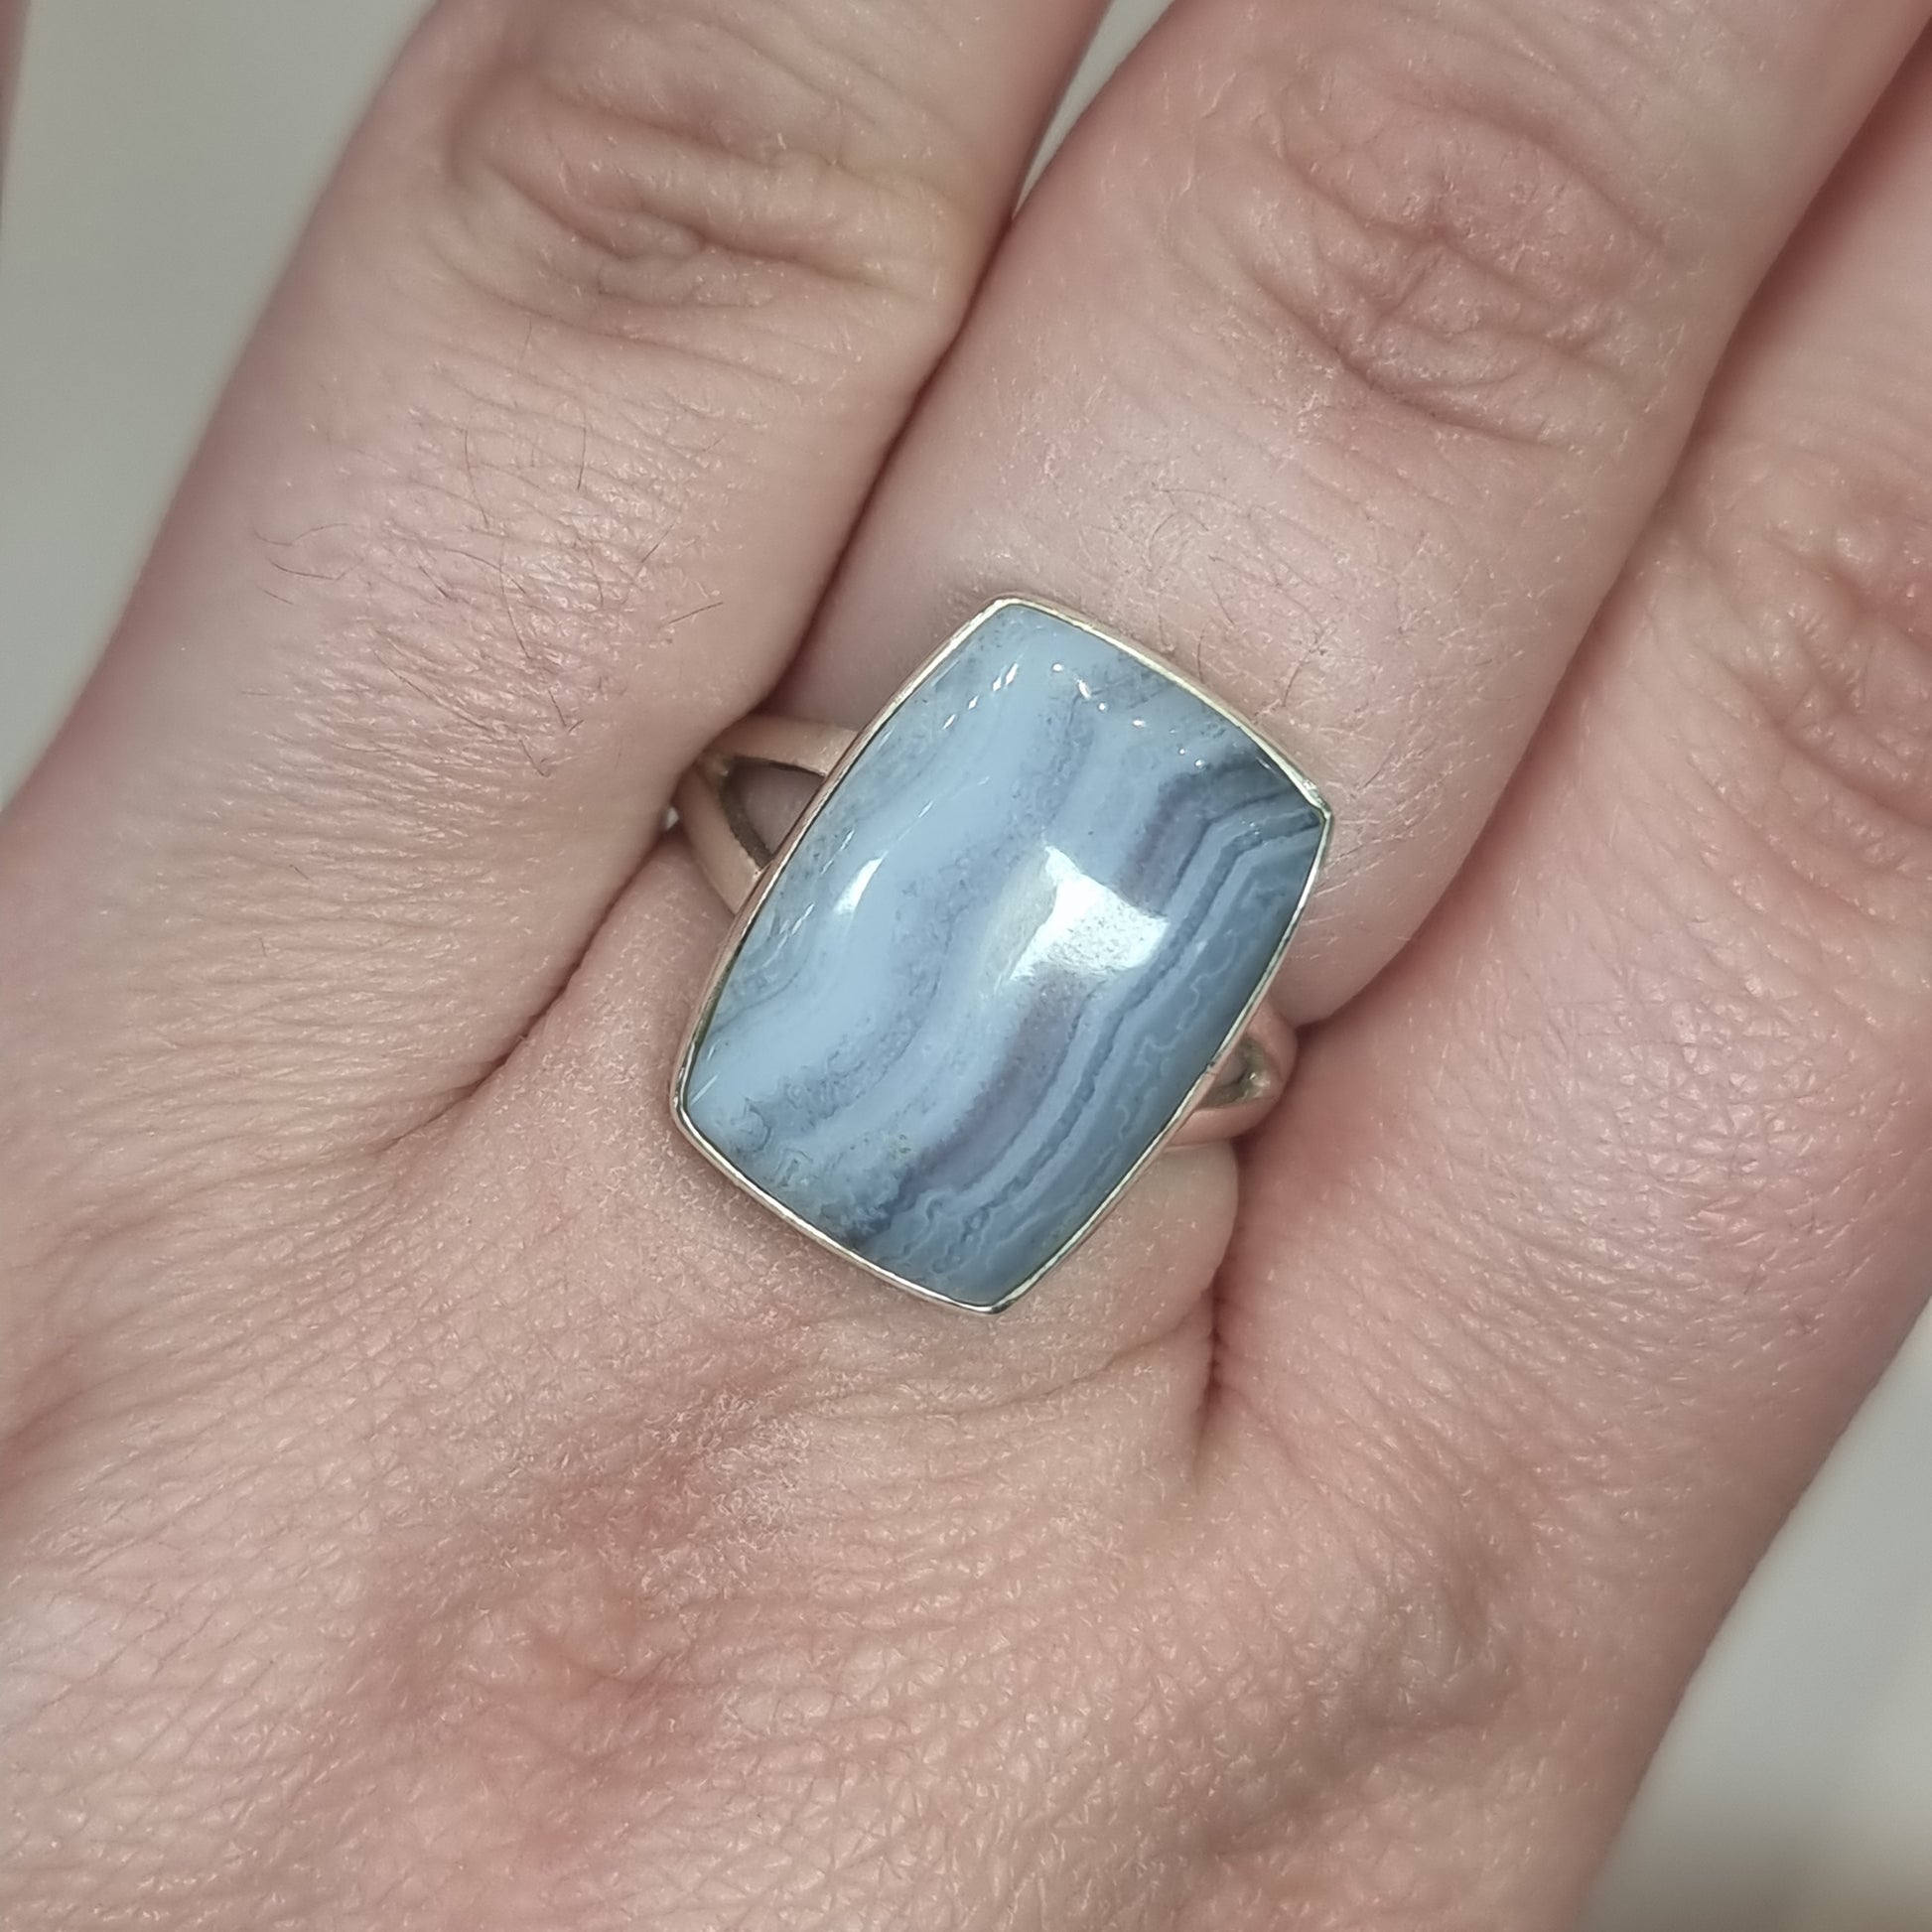 Blue lace agate ring - Rivendell Shop